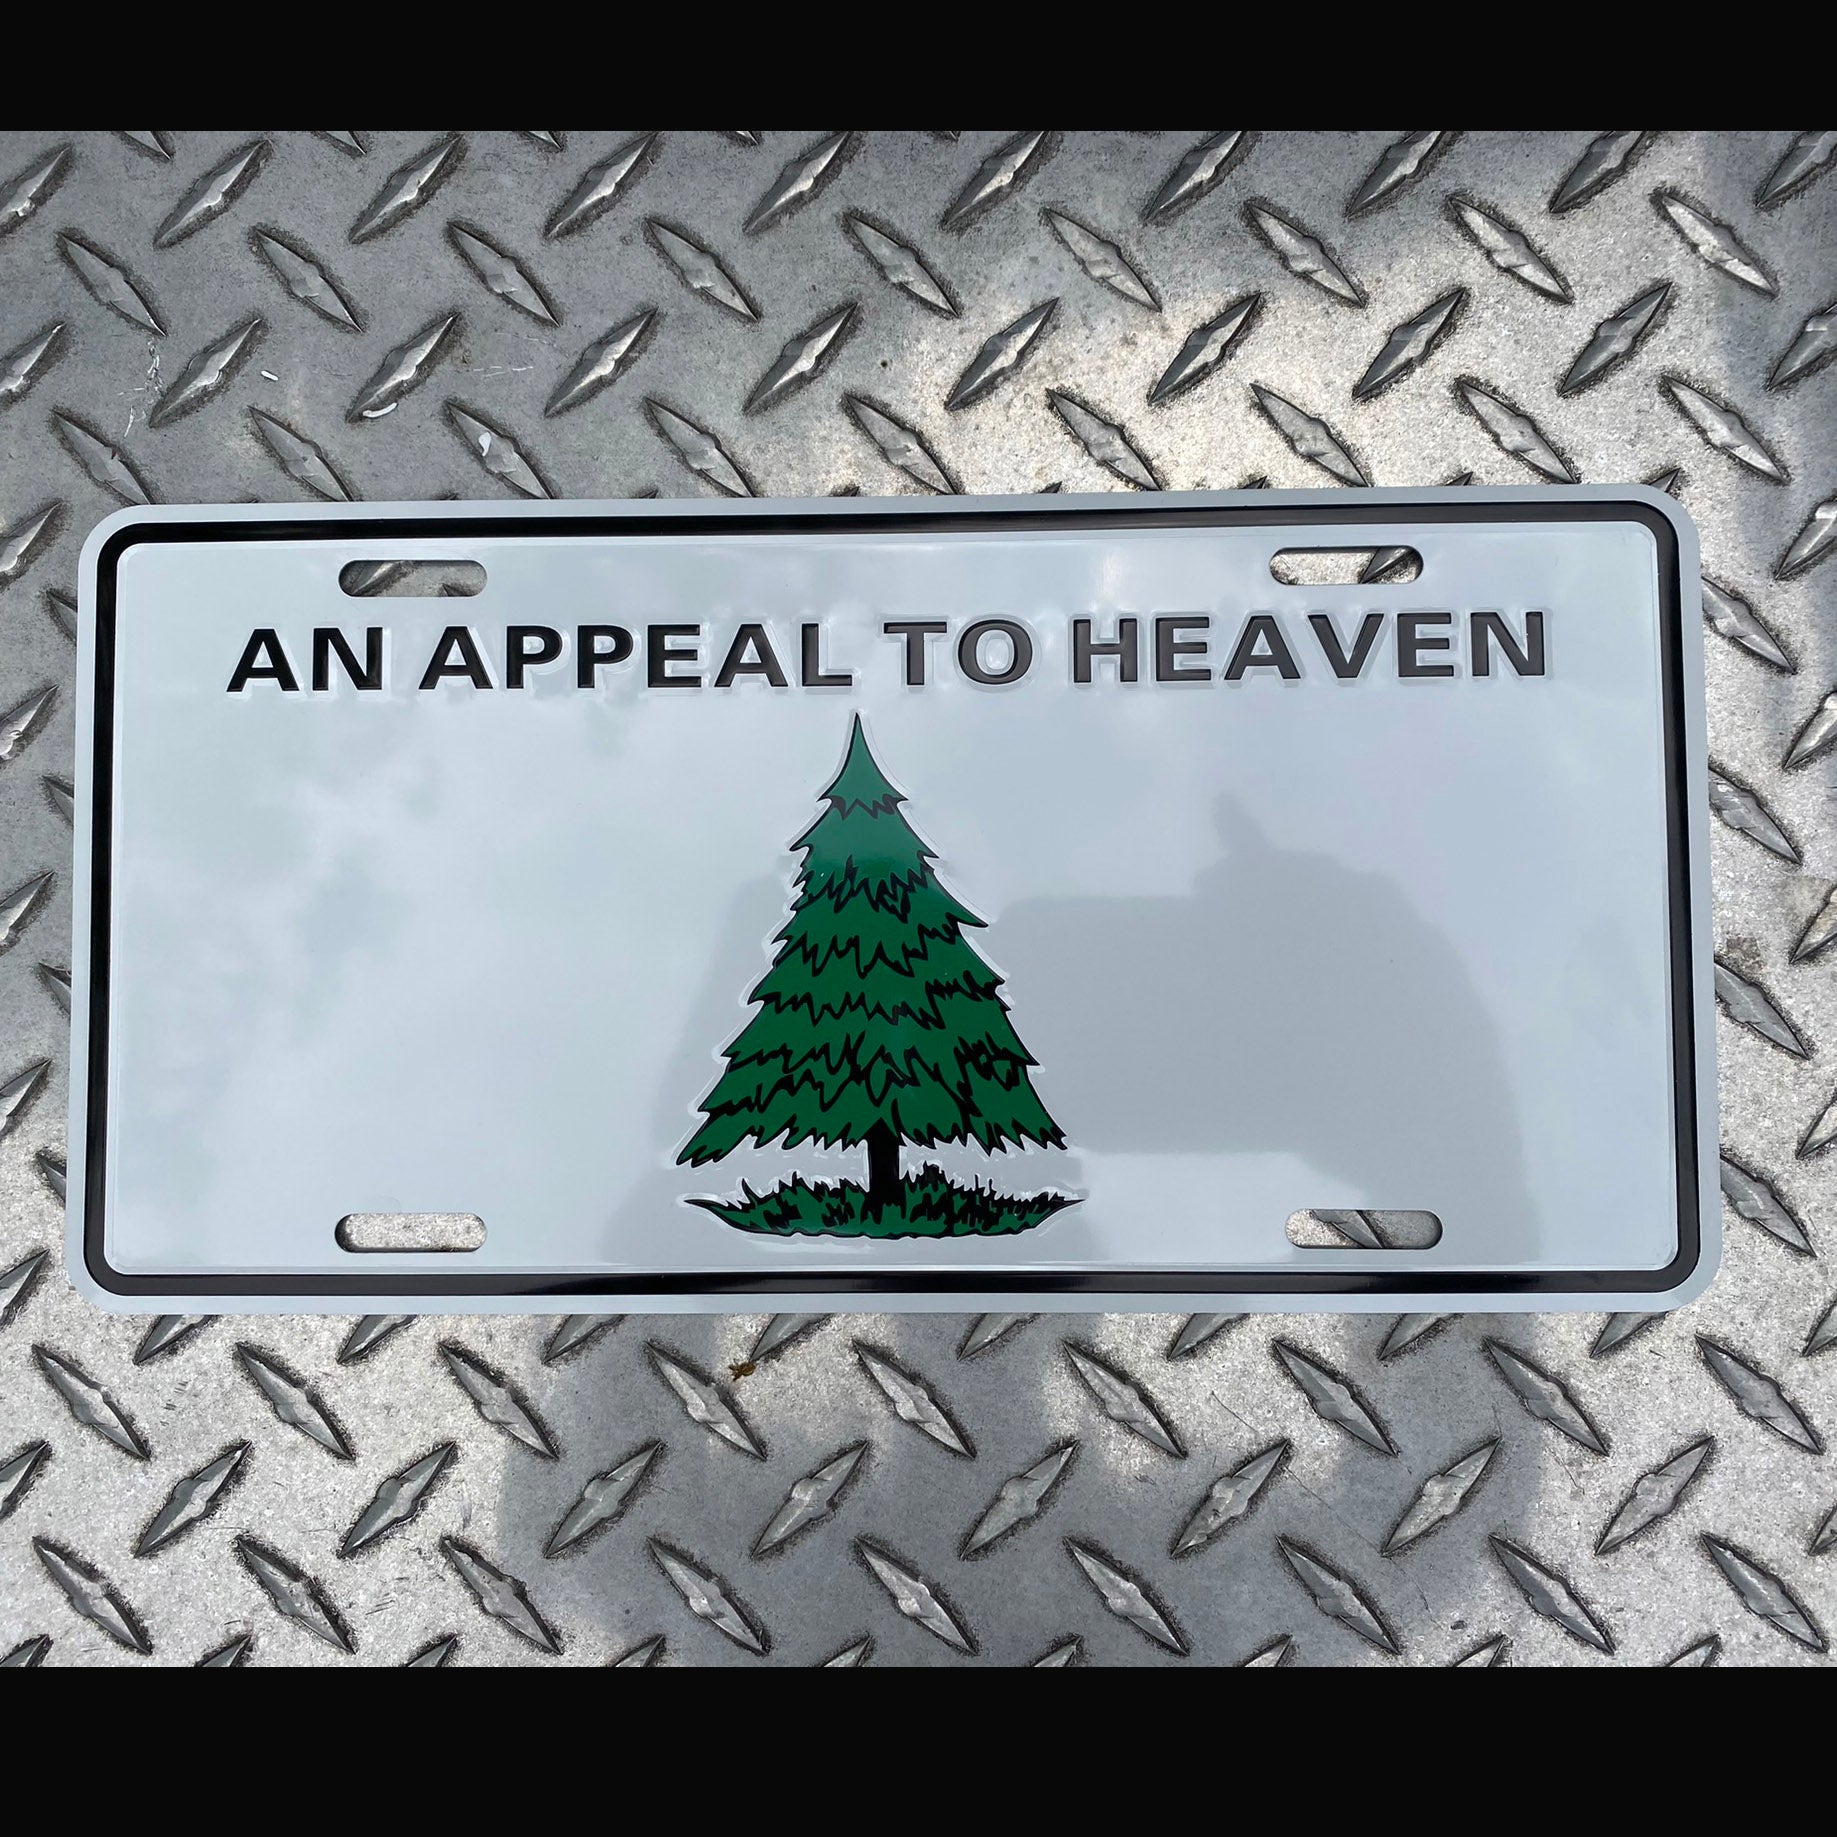 Appeal To Heaven - License Plate